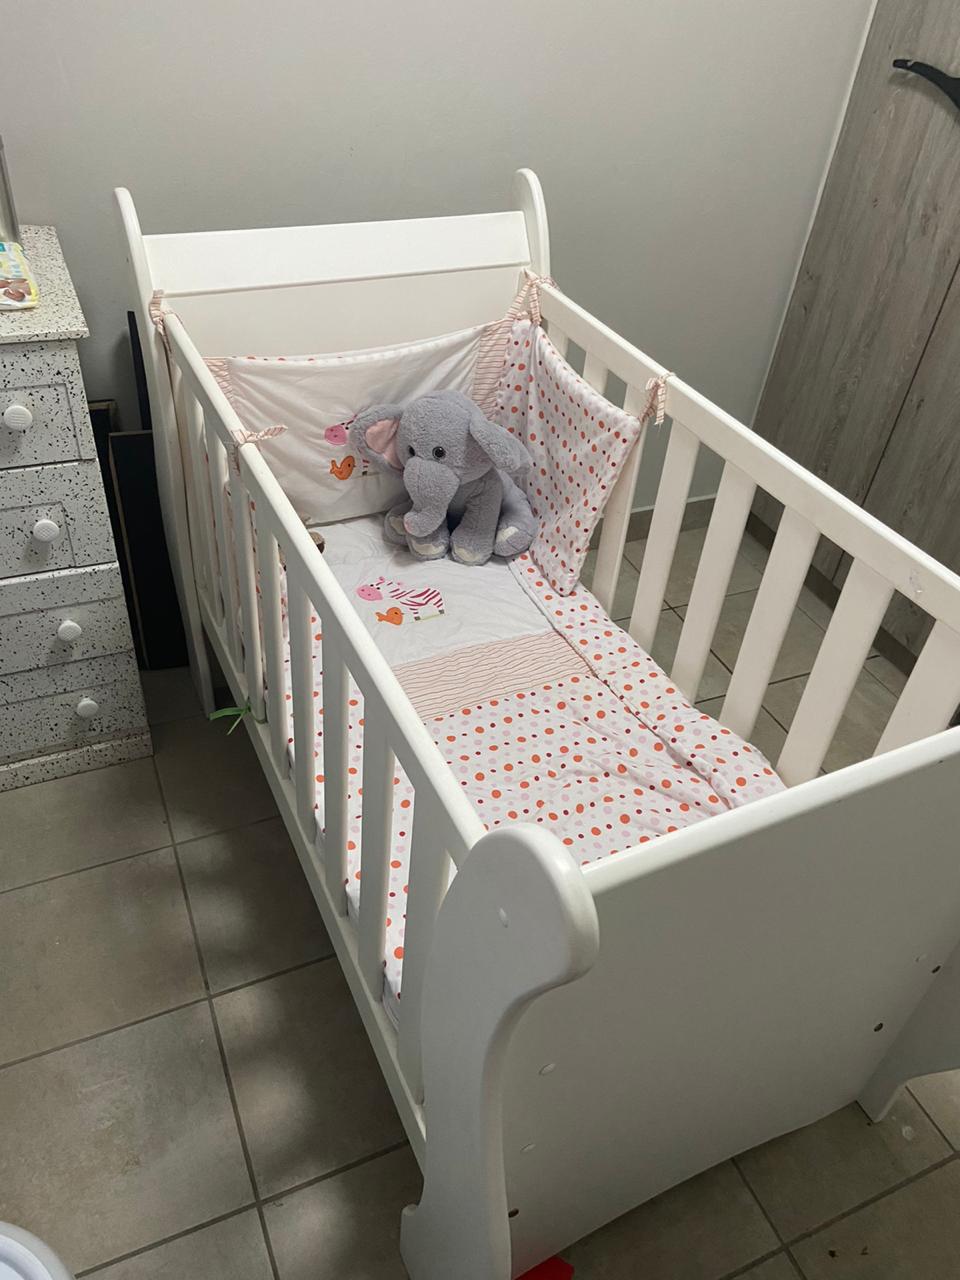 cot bed for sale